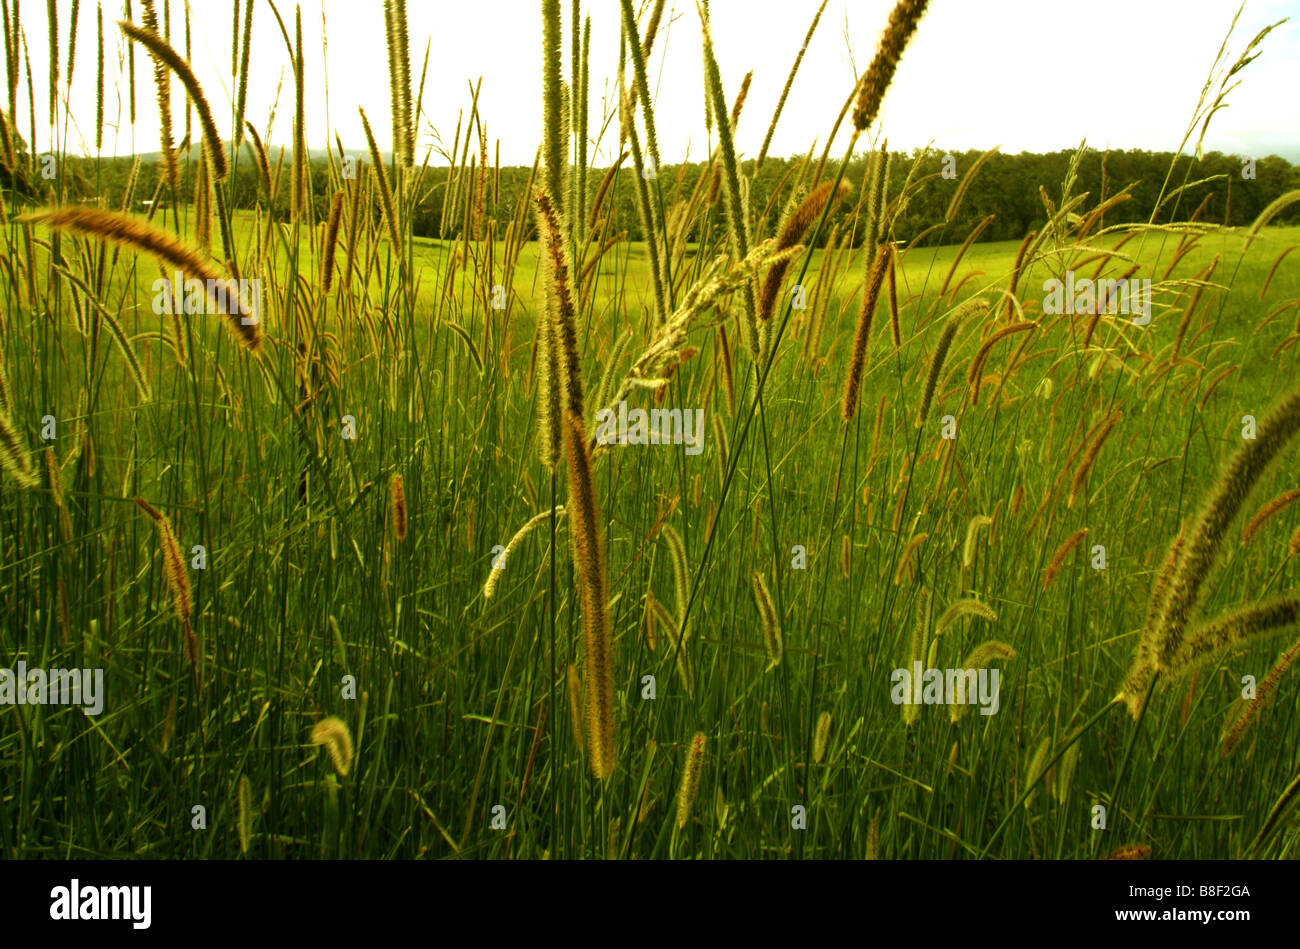 Native or indigenous grasses grow on the roadside in Australia Stock Photo